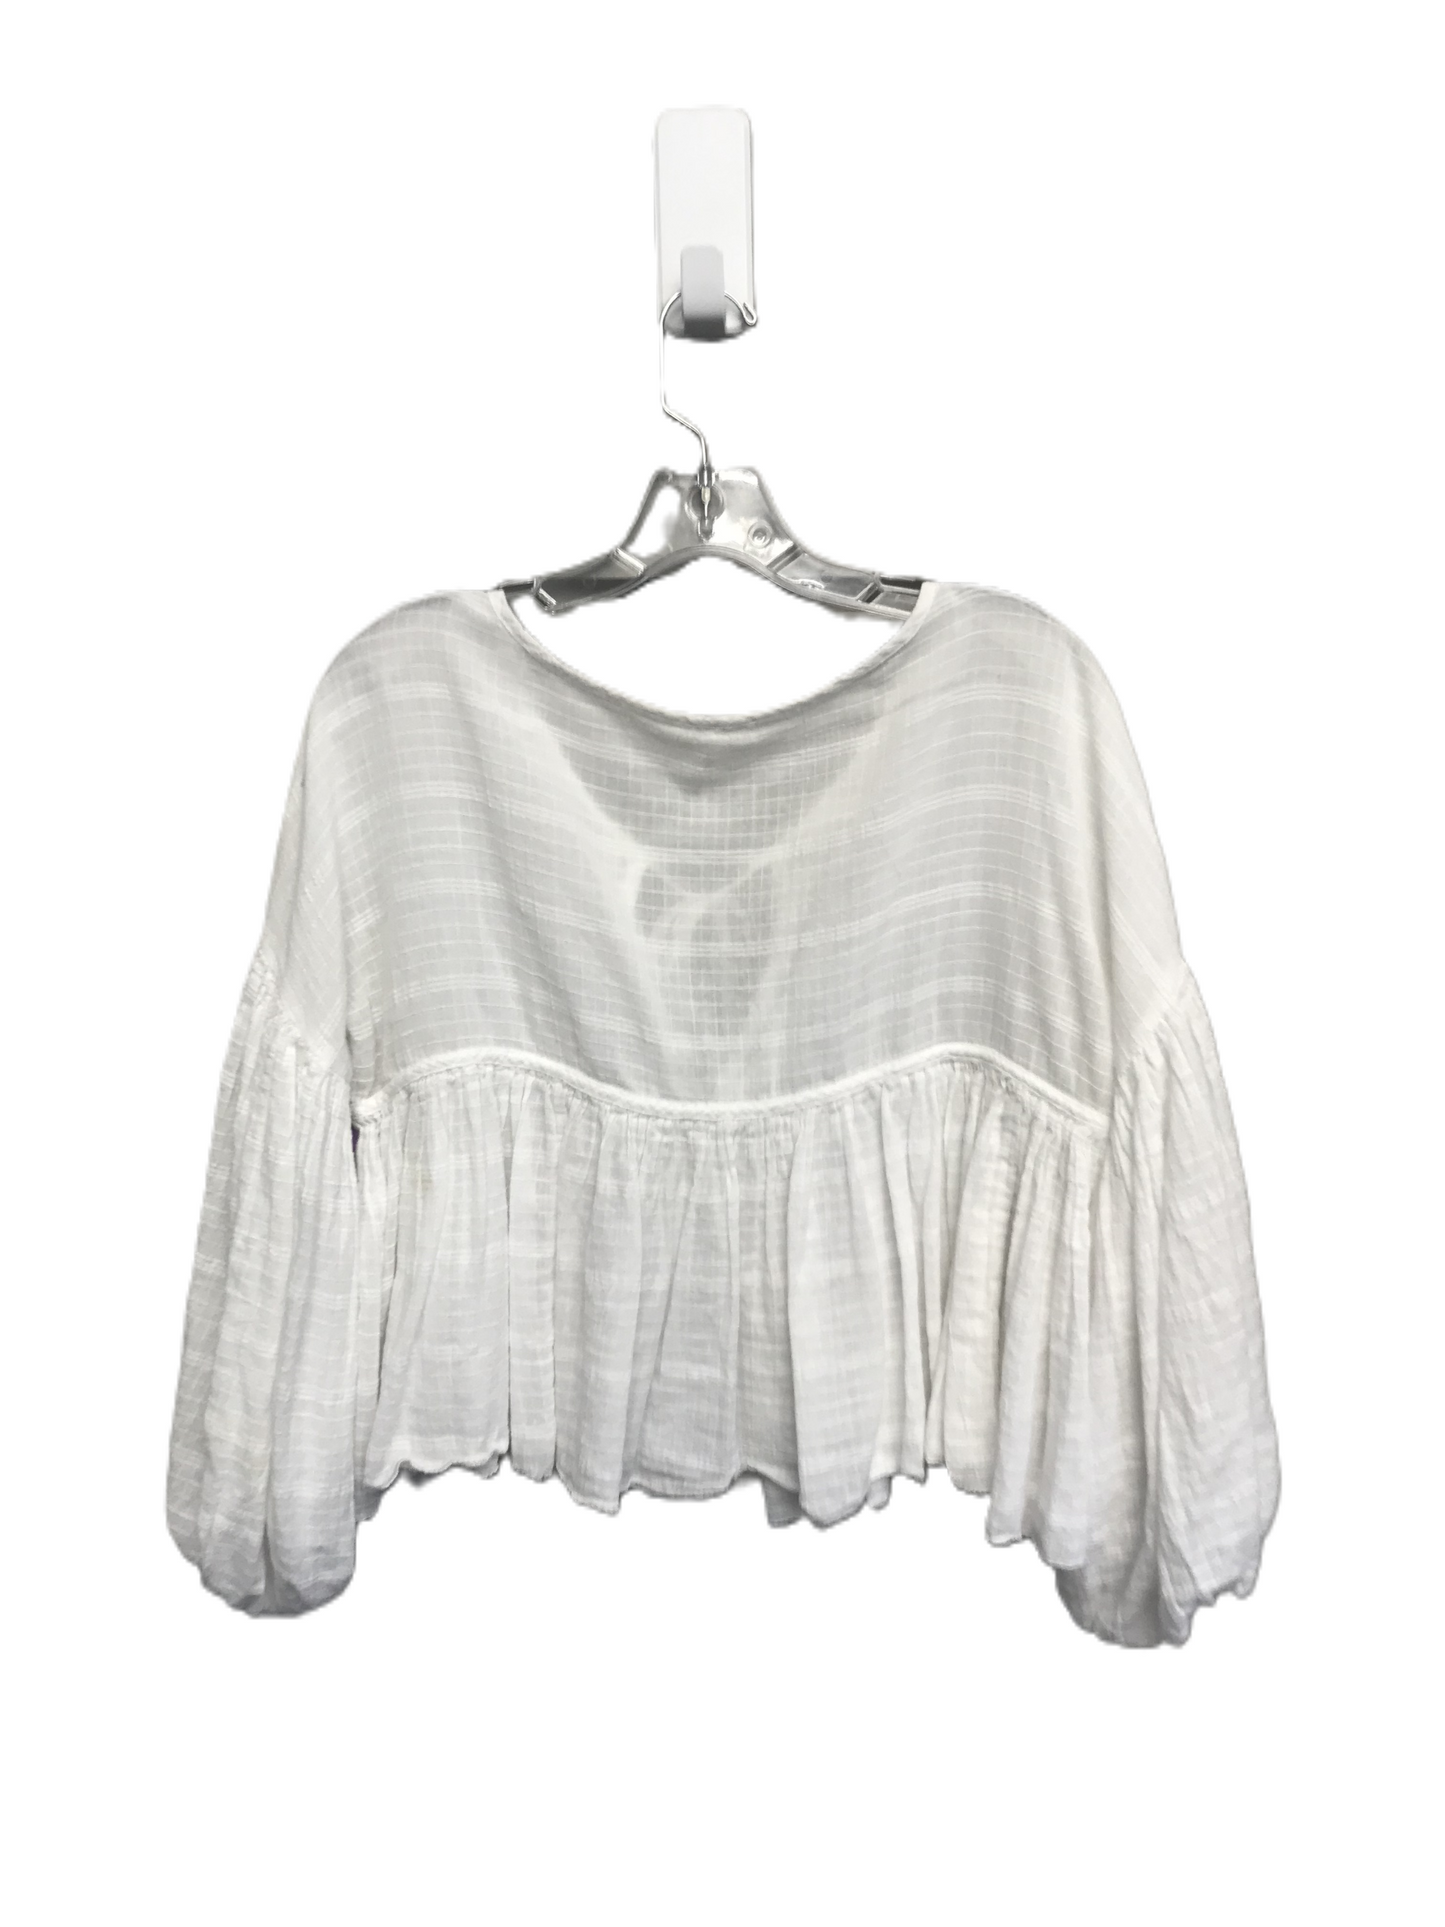 White Top 3/4 Sleeve By Free People, Size: M